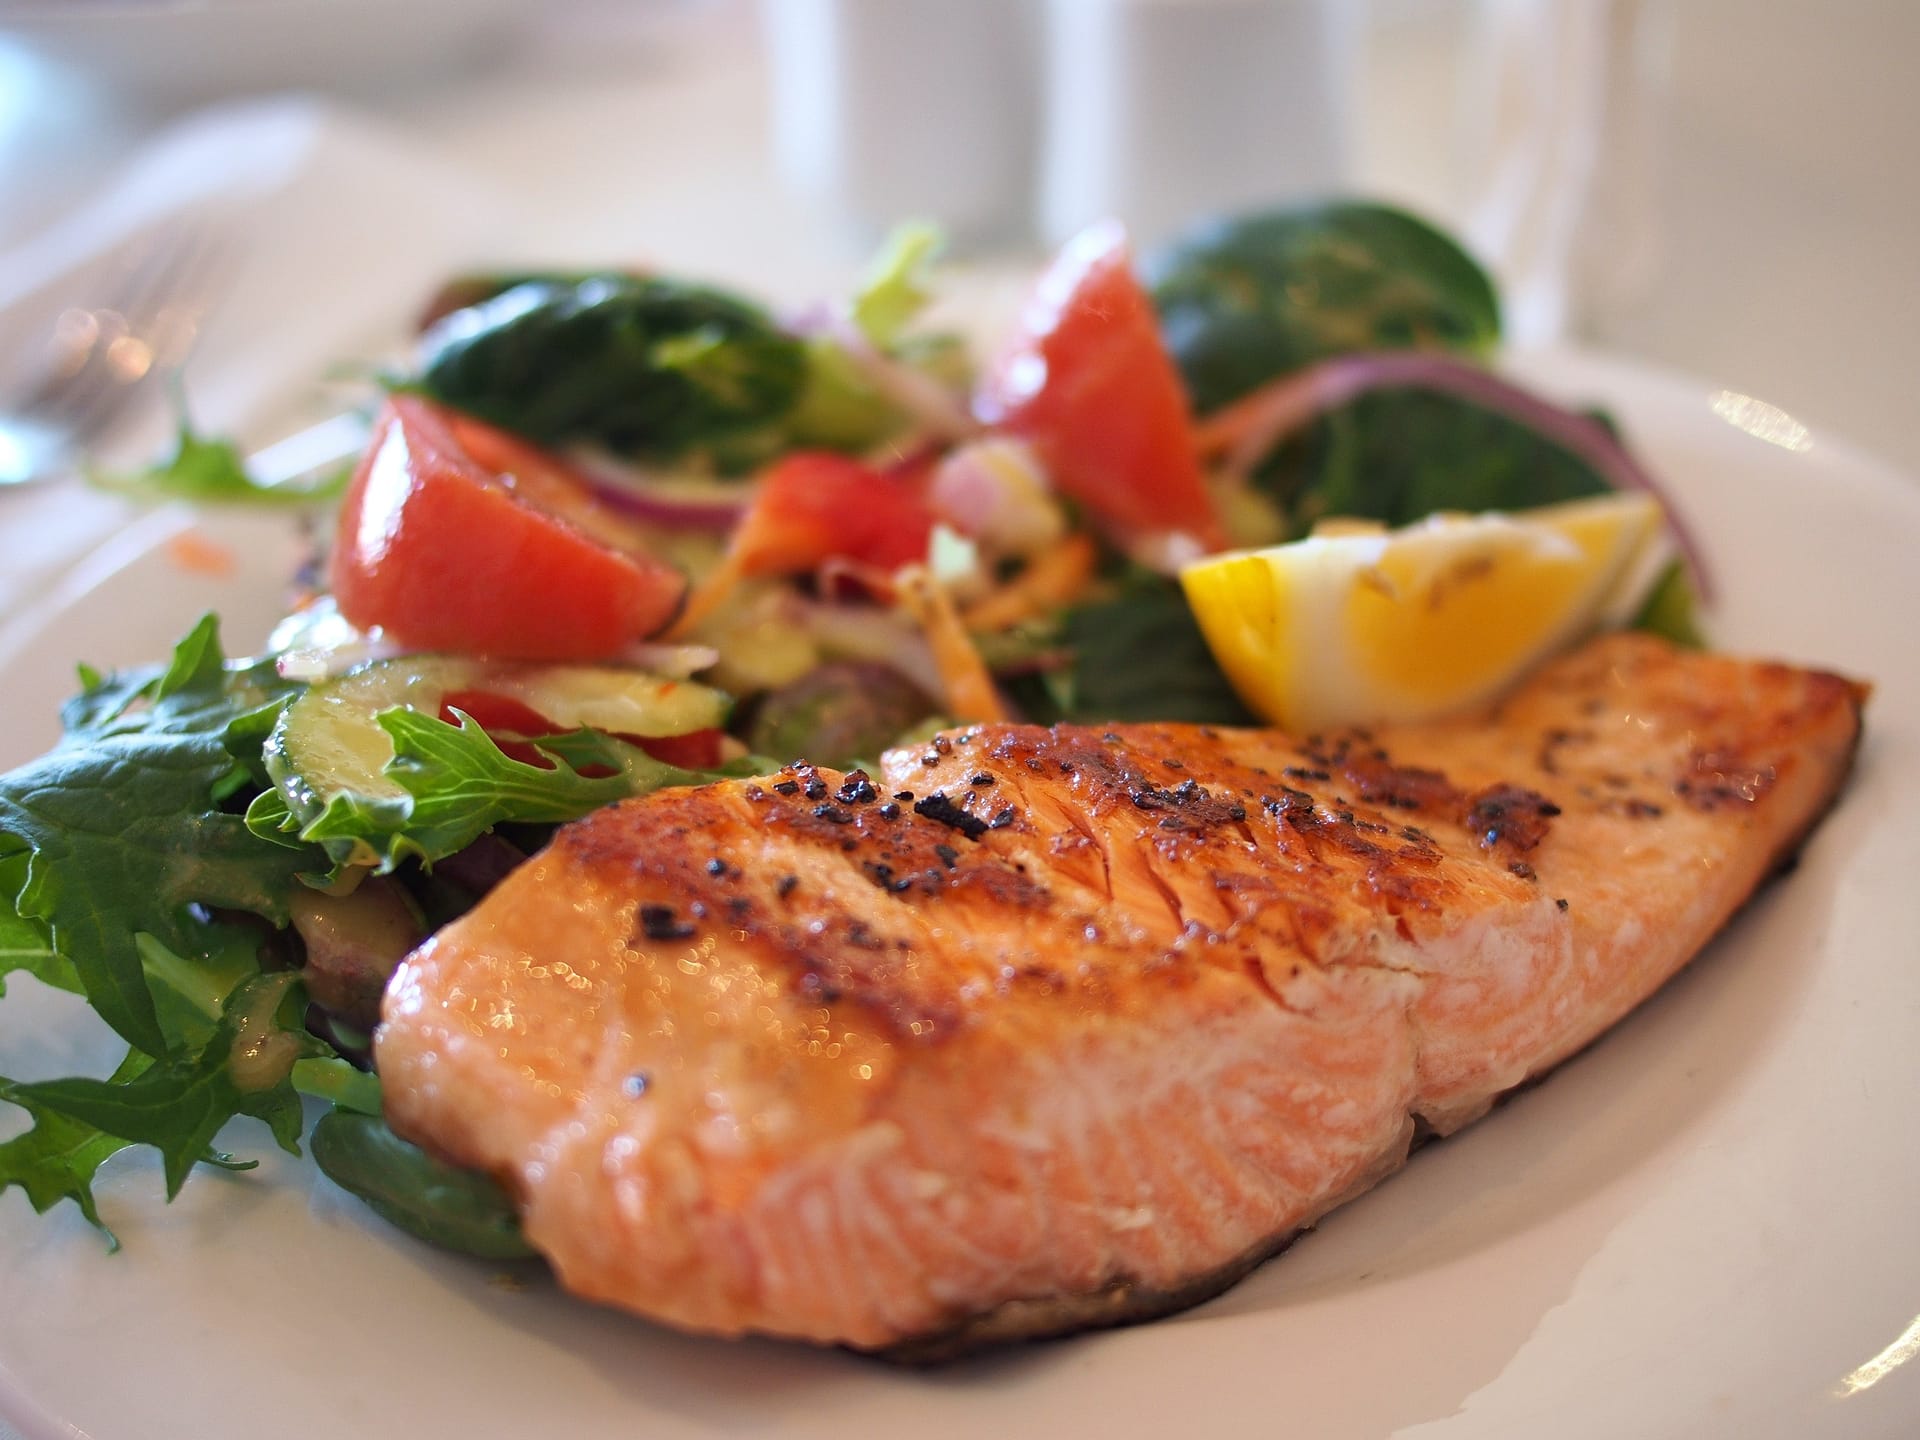 A plate of seared salmon and vegetables